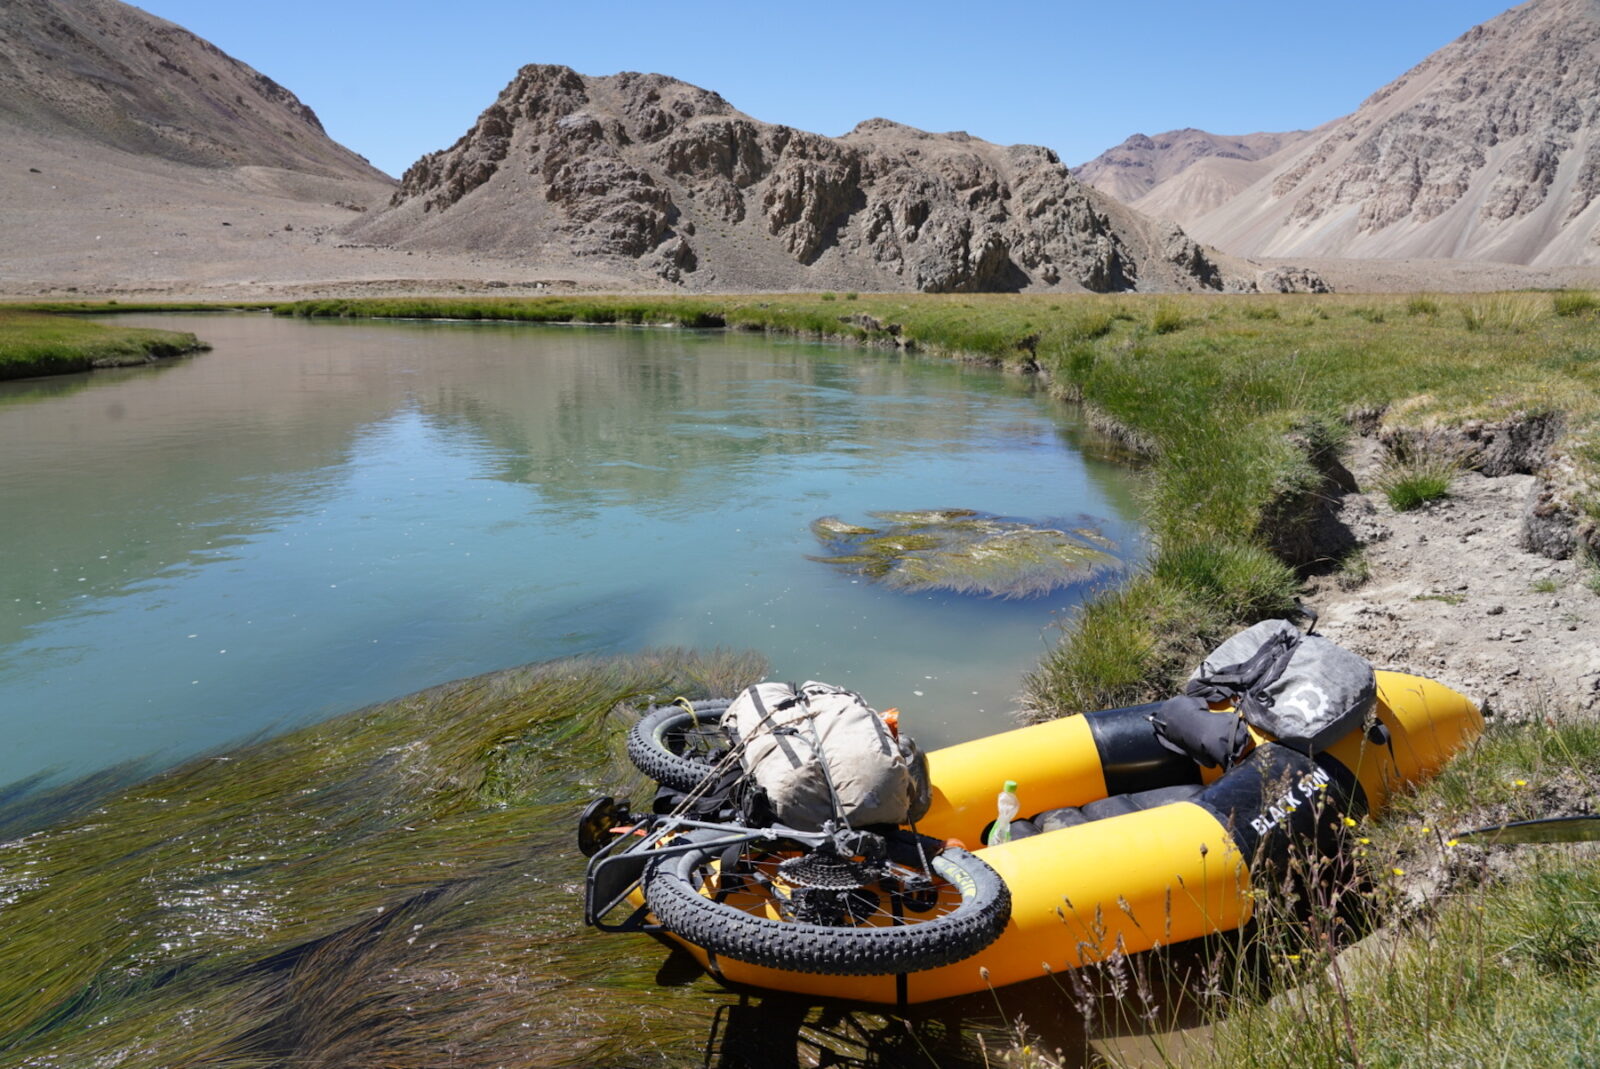 What's in your bikerafting kit?